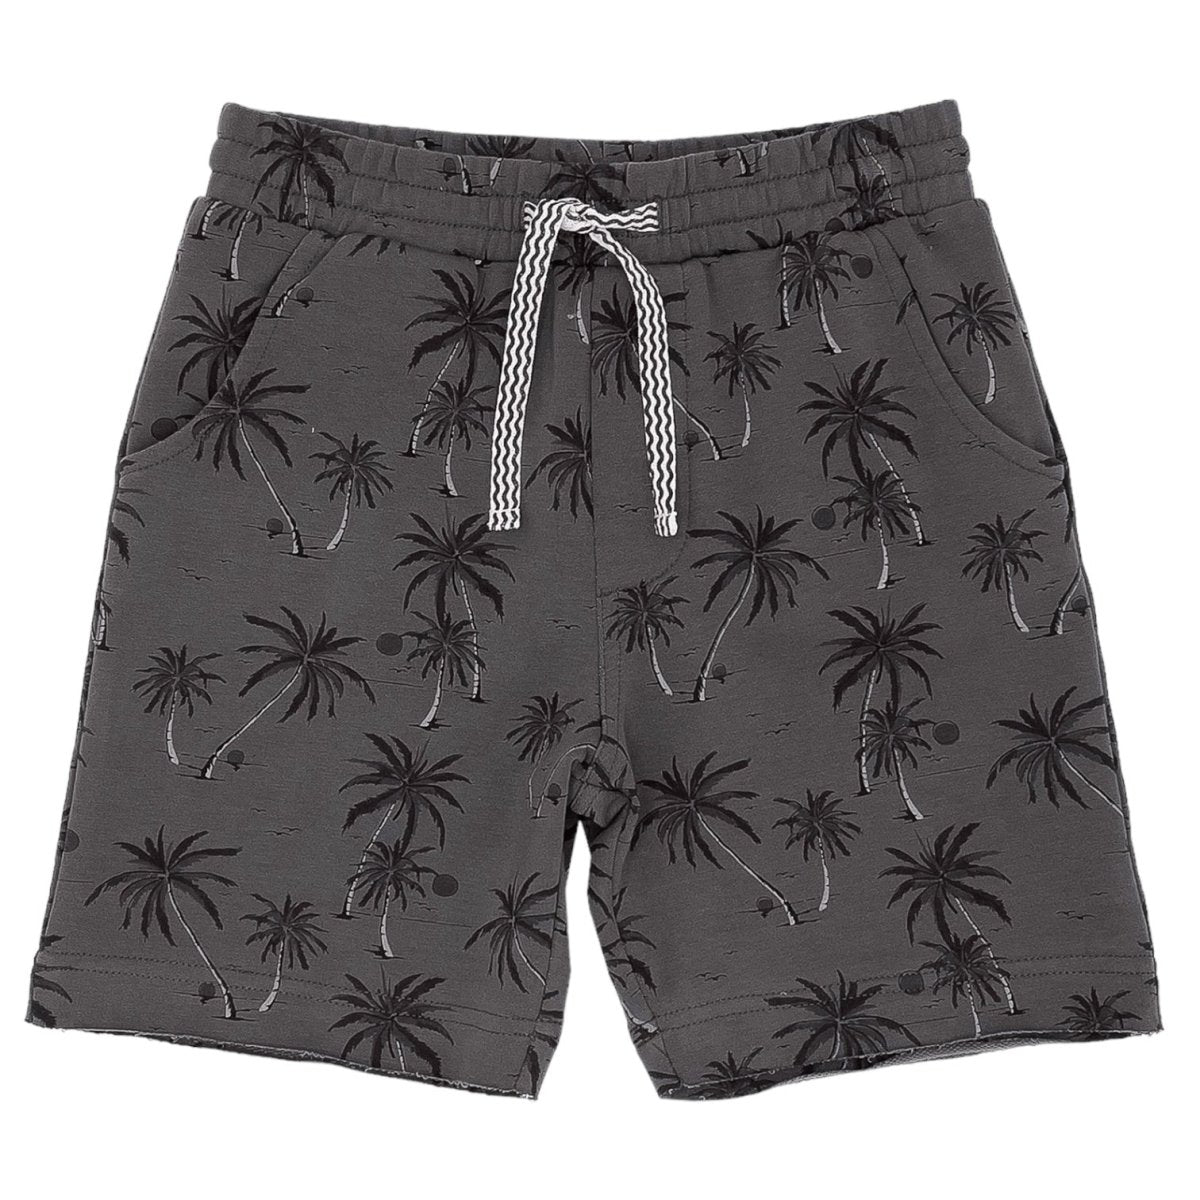 PALM TREES LOW TIDE SHORTS - FEATHER 4 ARROW